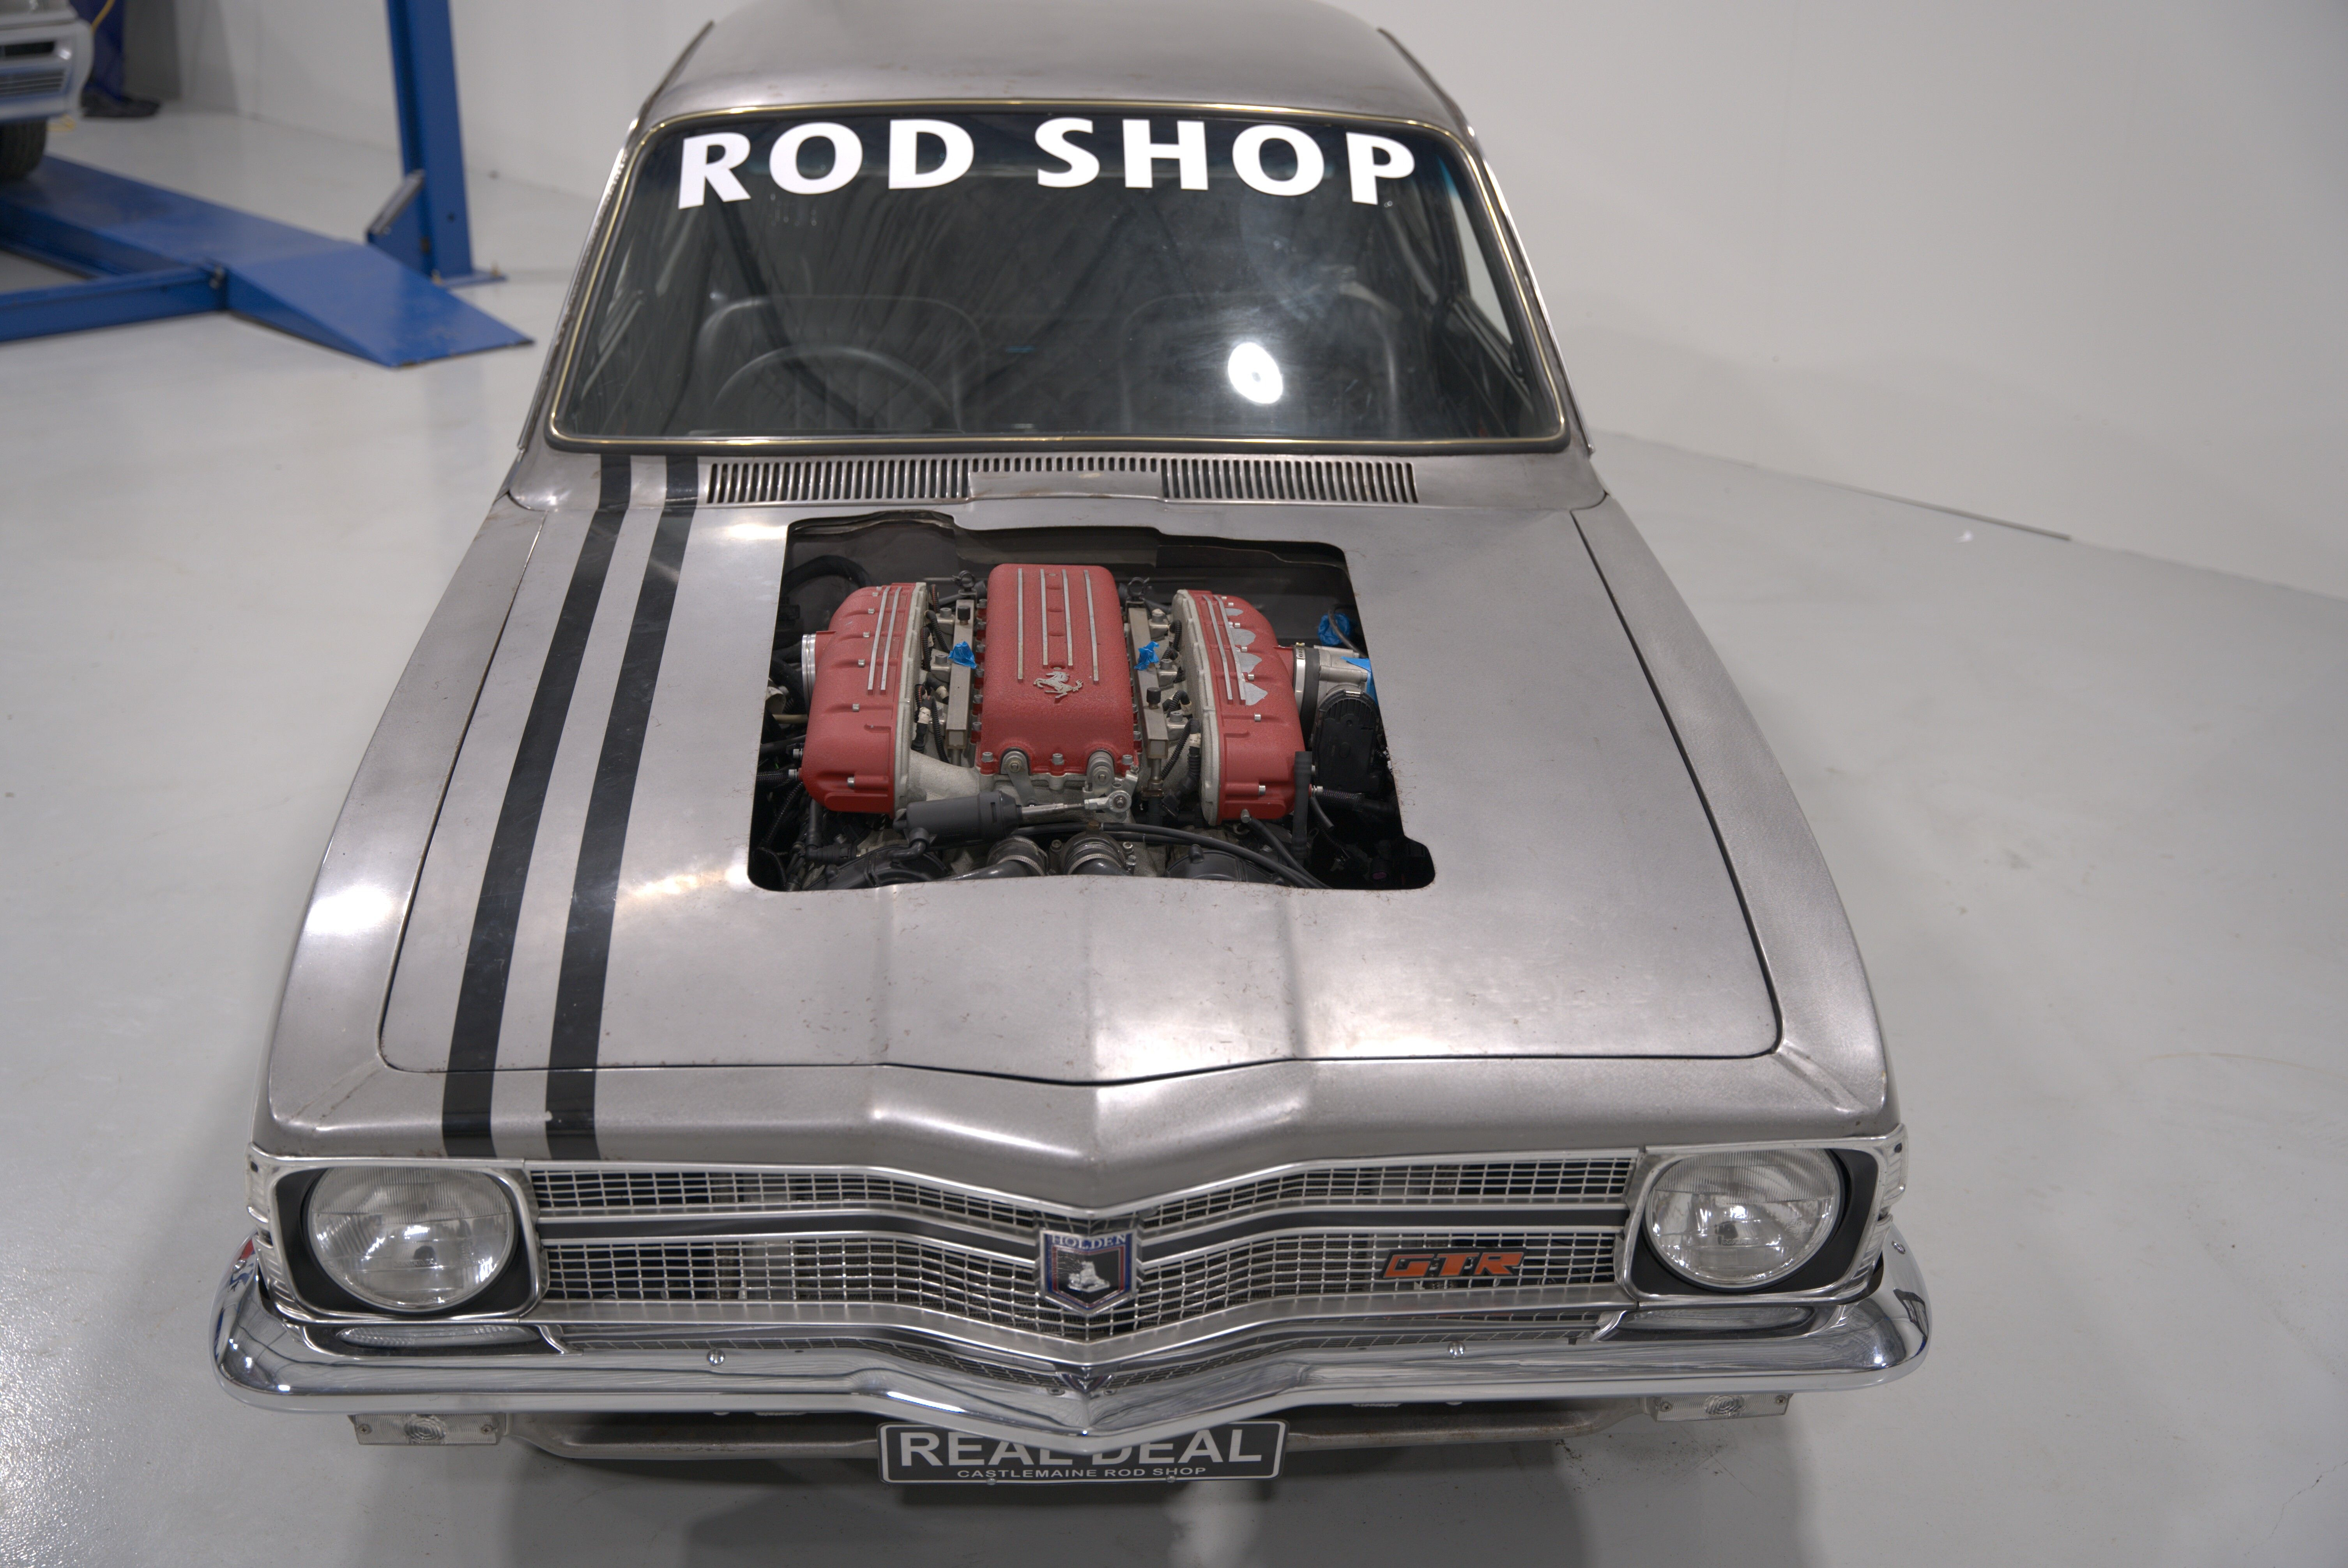 Street Machine Features Real Deal Lc Torana 8